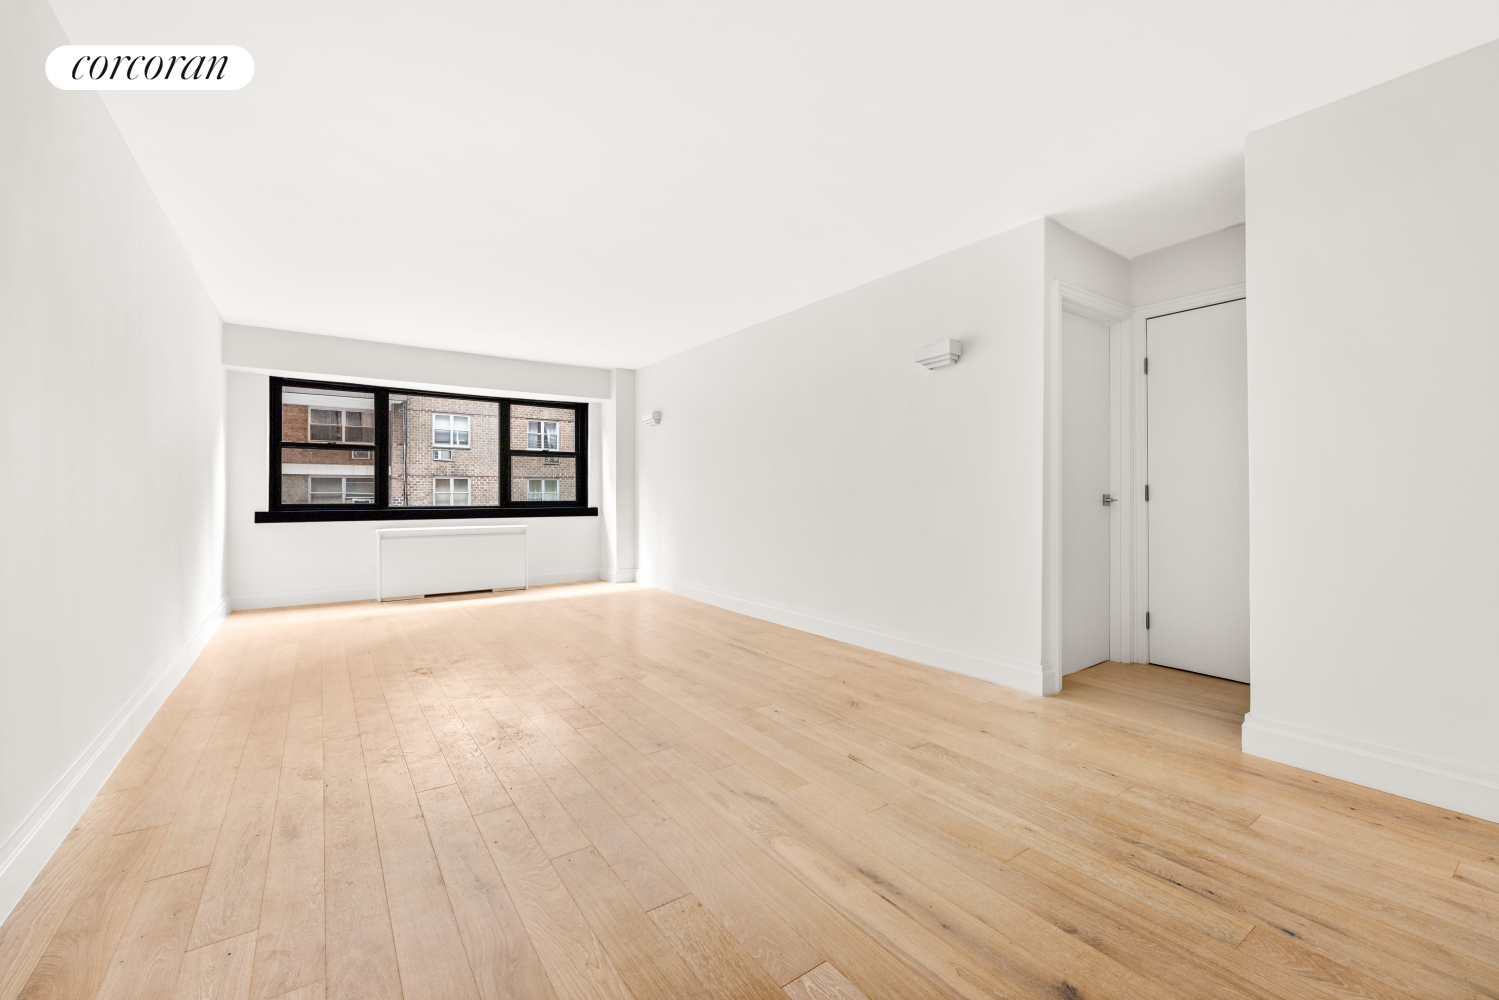 235 East 87th Street 2F, Yorkville, Upper East Side, NYC - 1 Bedrooms  
1 Bathrooms  
3 Rooms - 